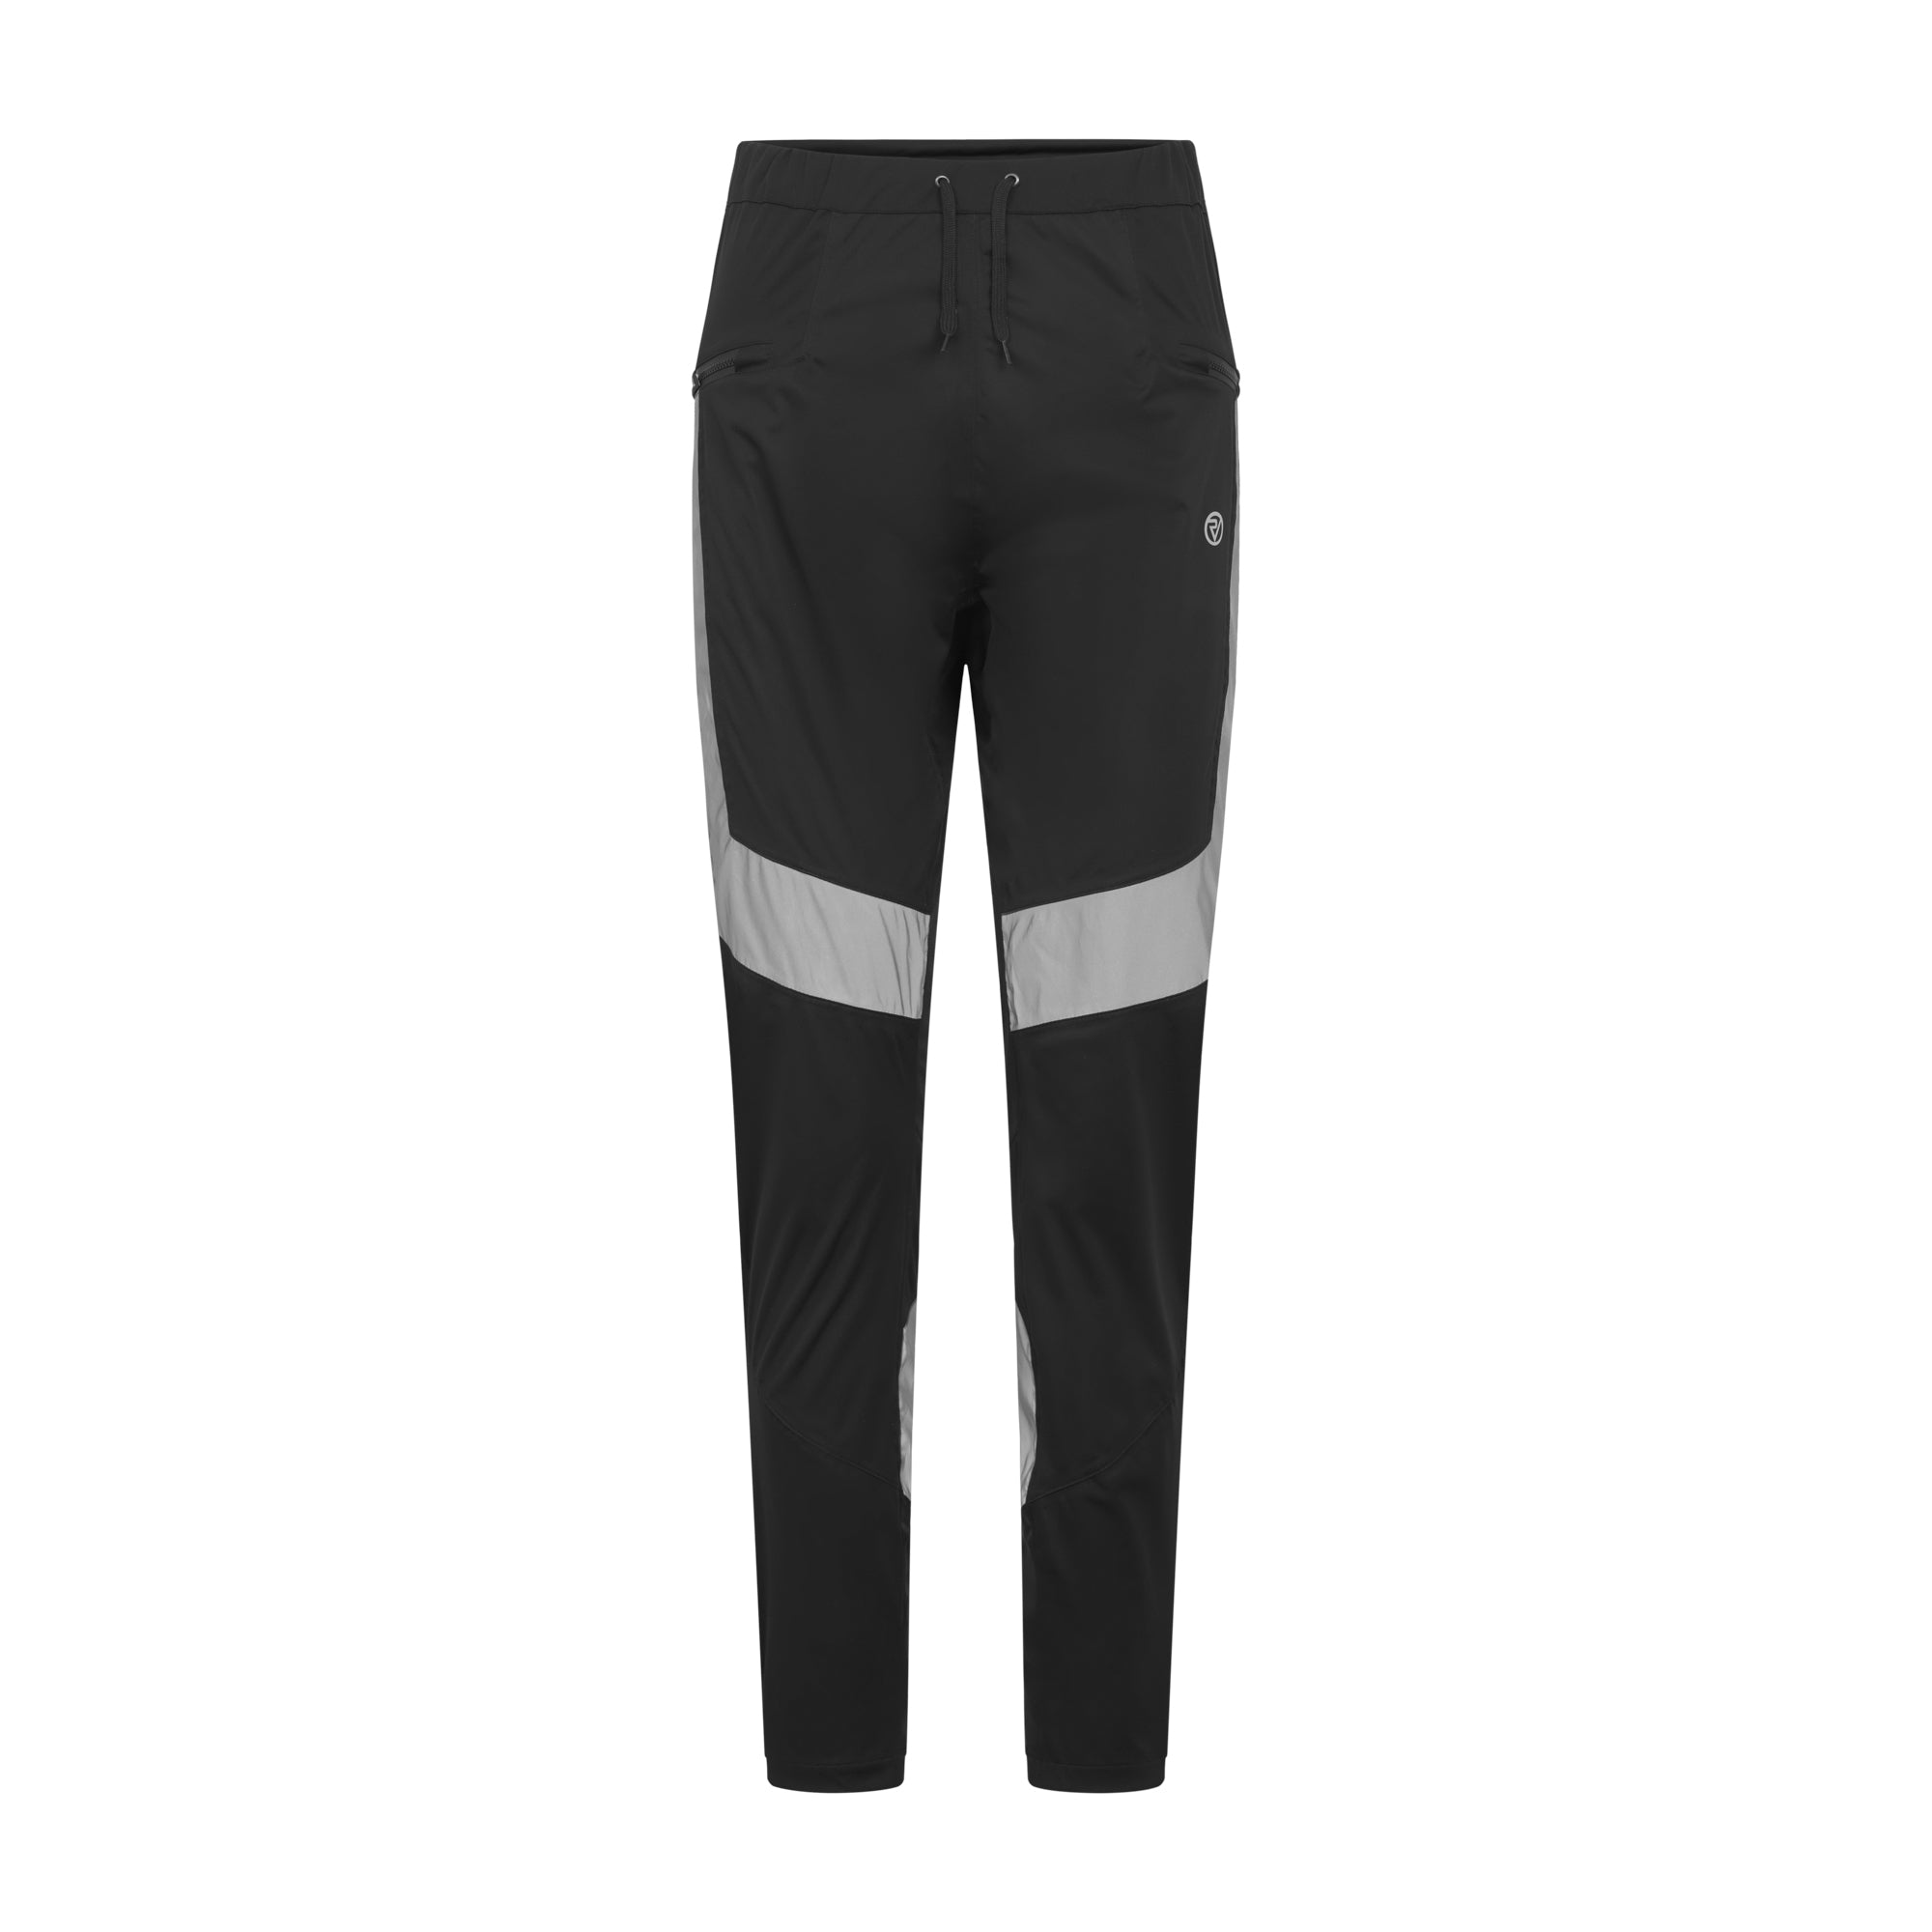 Women’s Tailored Waterproof Cycling Trousers product